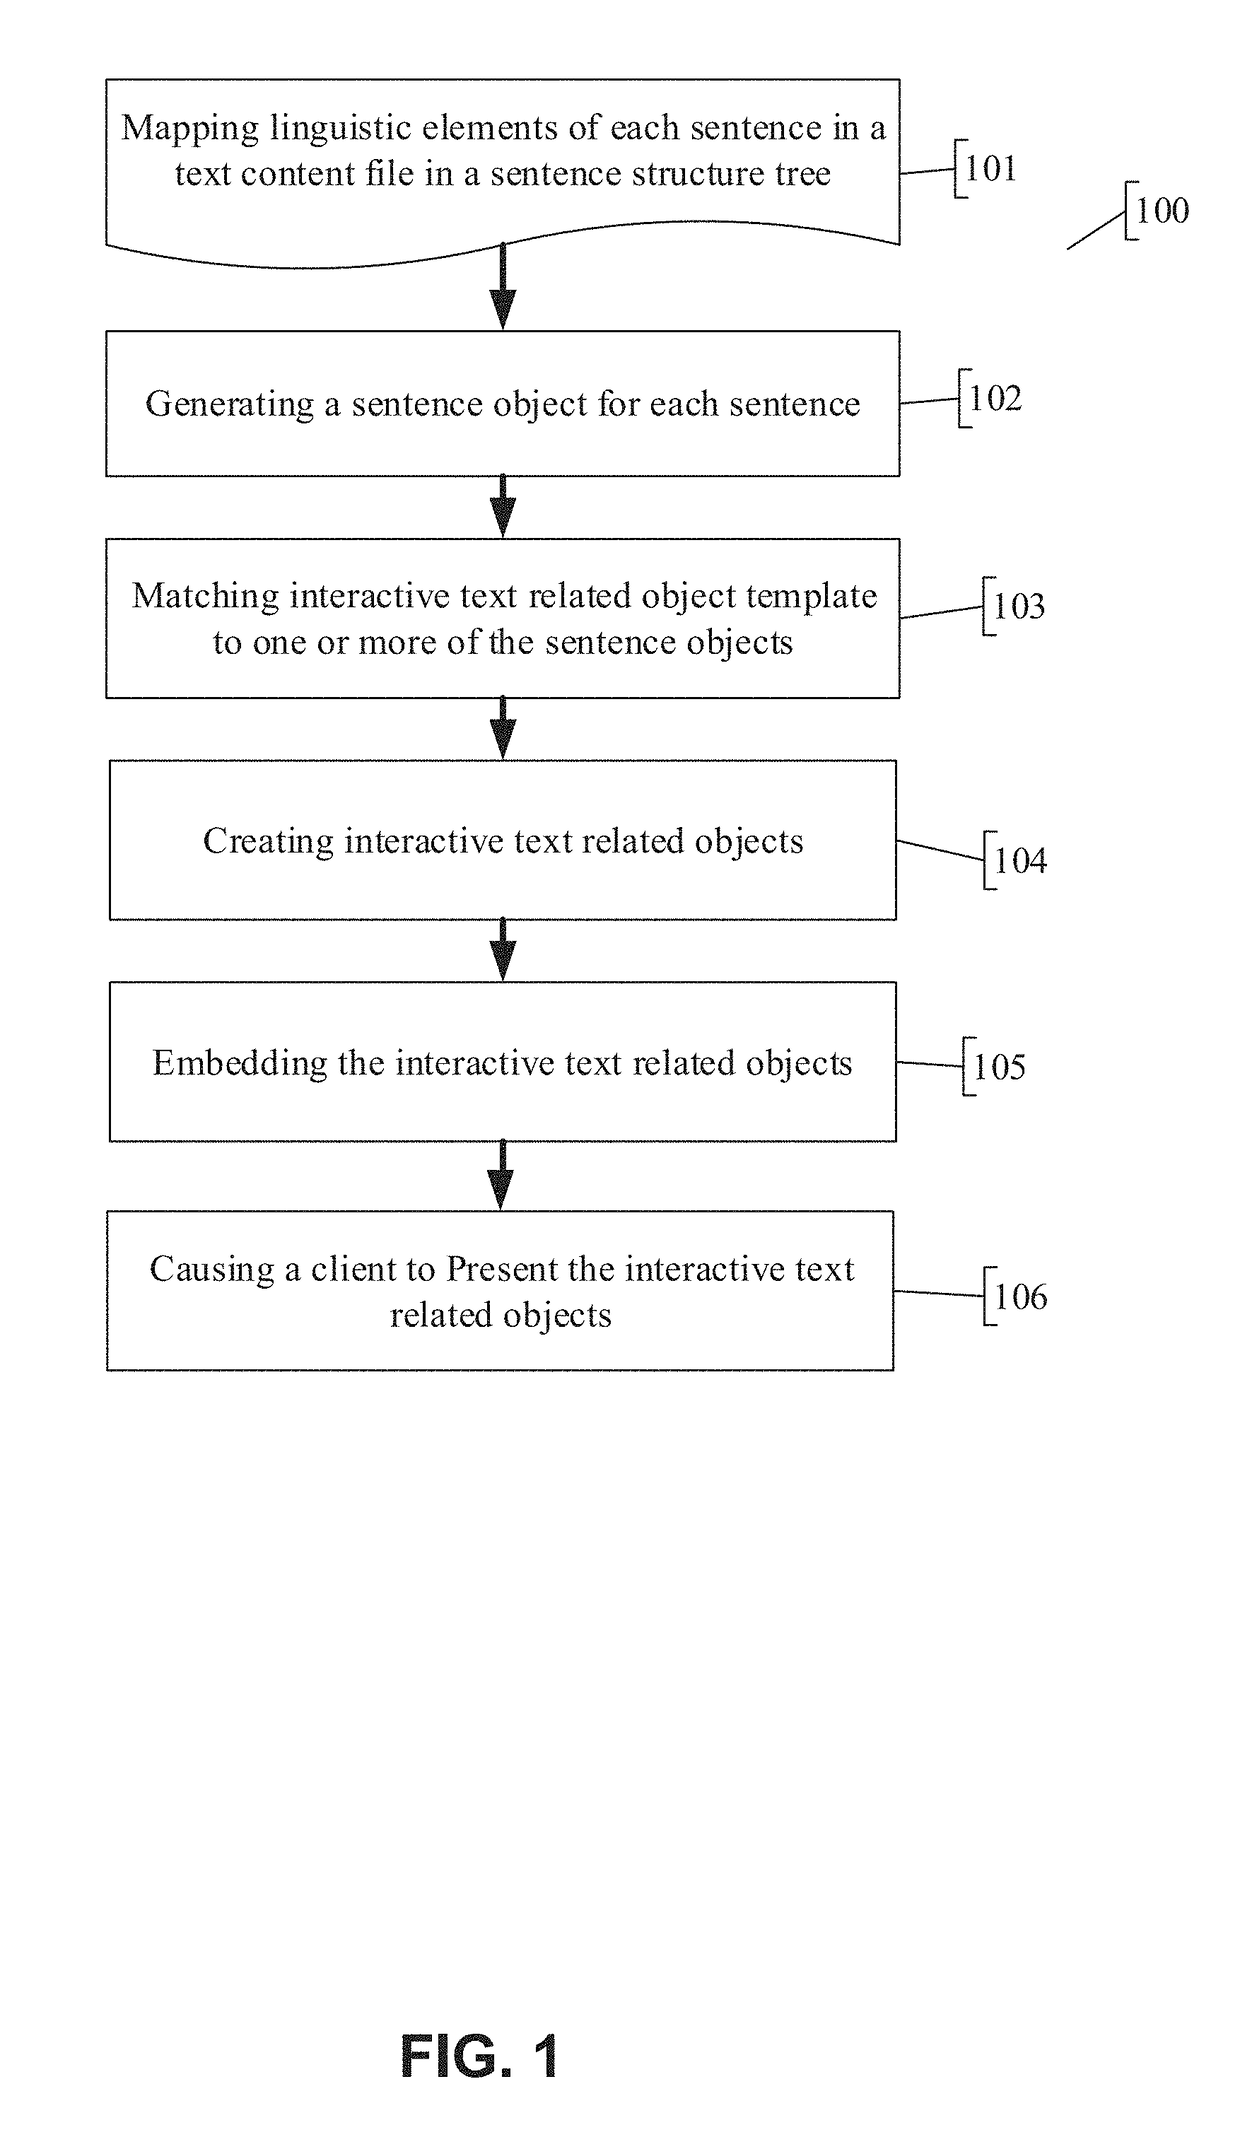 Dynamic and automatic generation of interactive text related objects